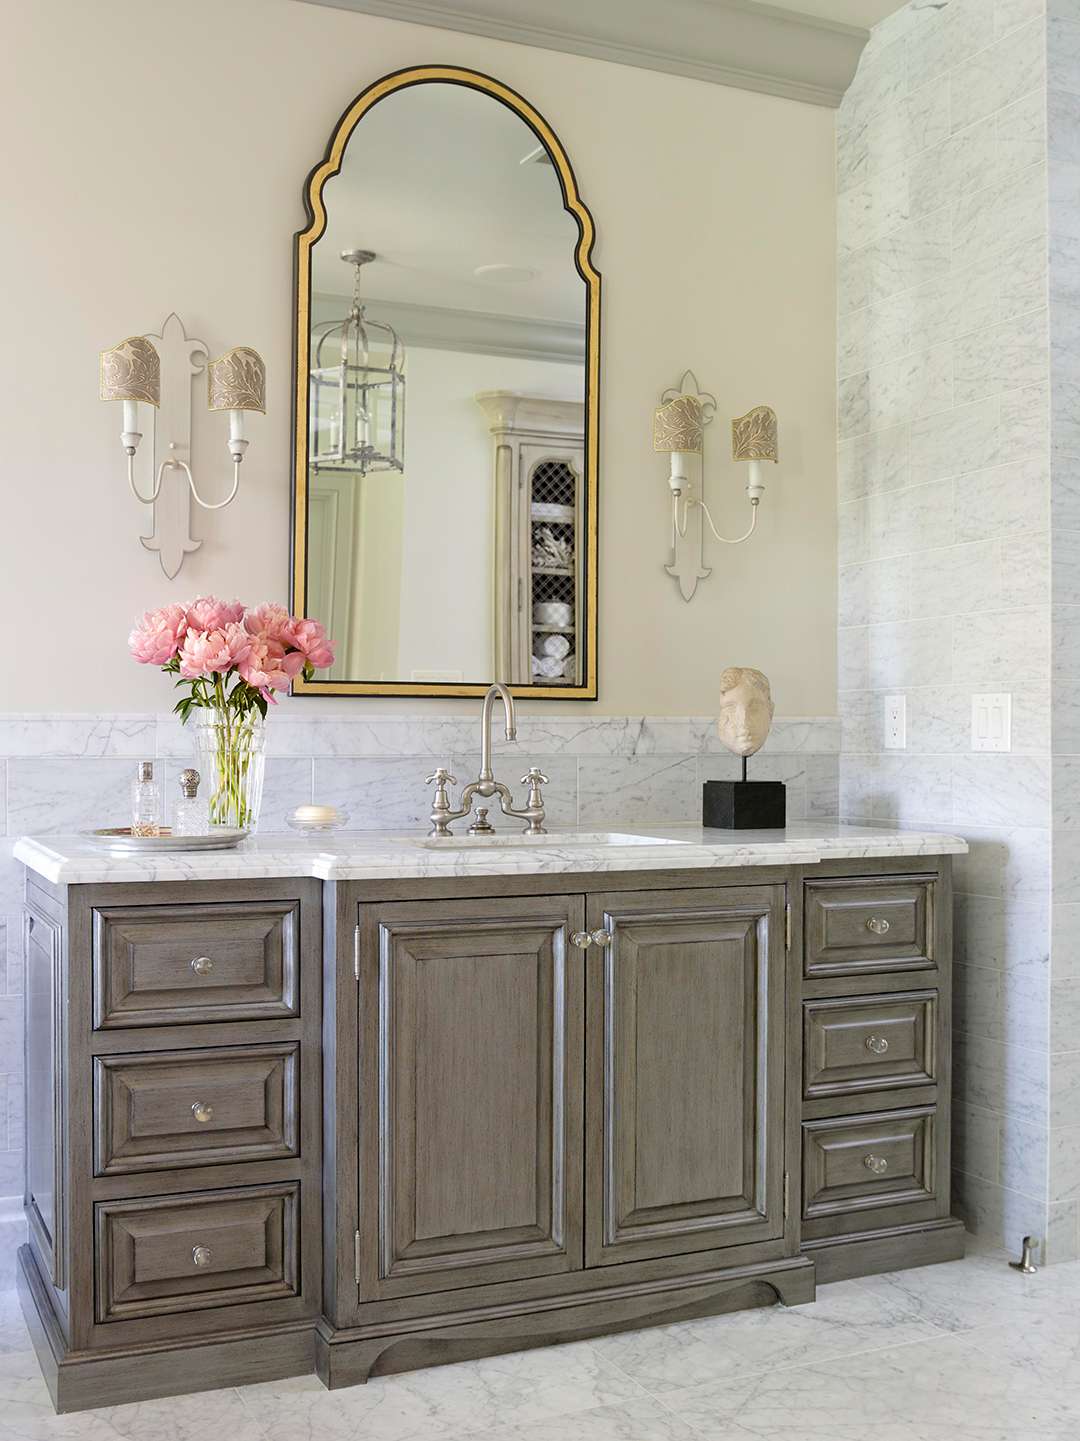 12 Popular Bathroom Paint Colors Our Editors Swear By Better Homes Gardens